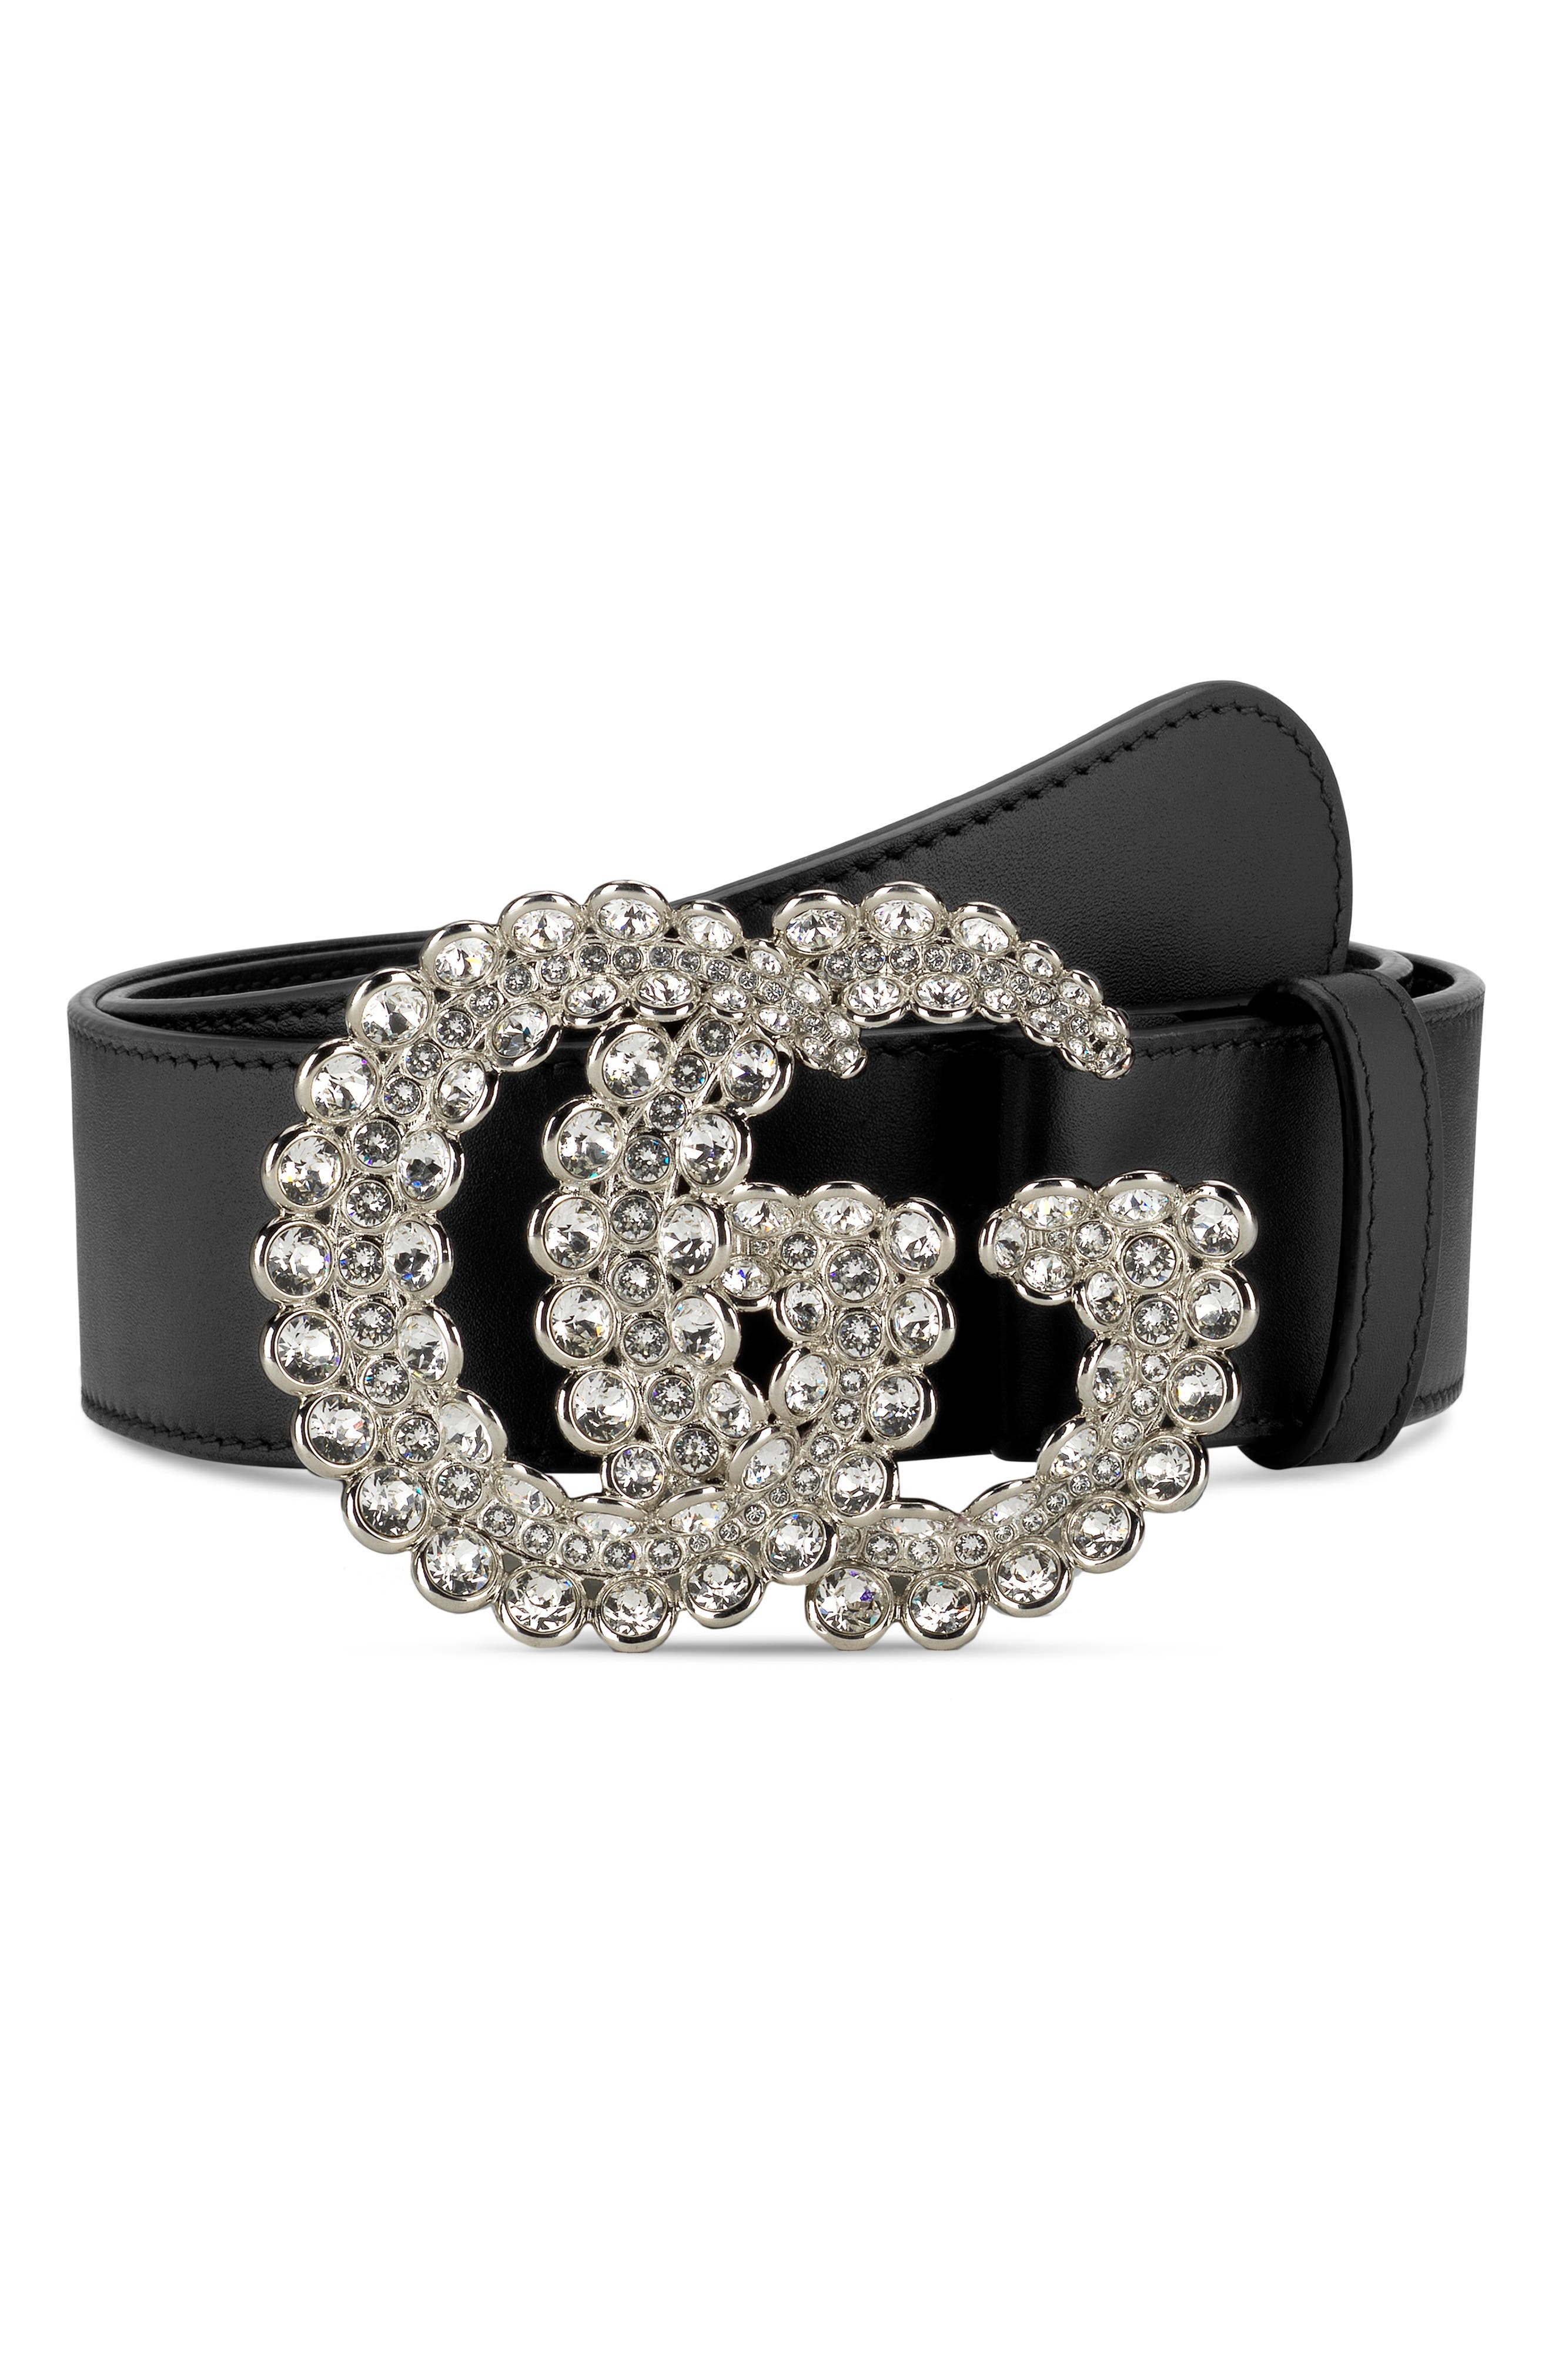 gucci bedazzled belt